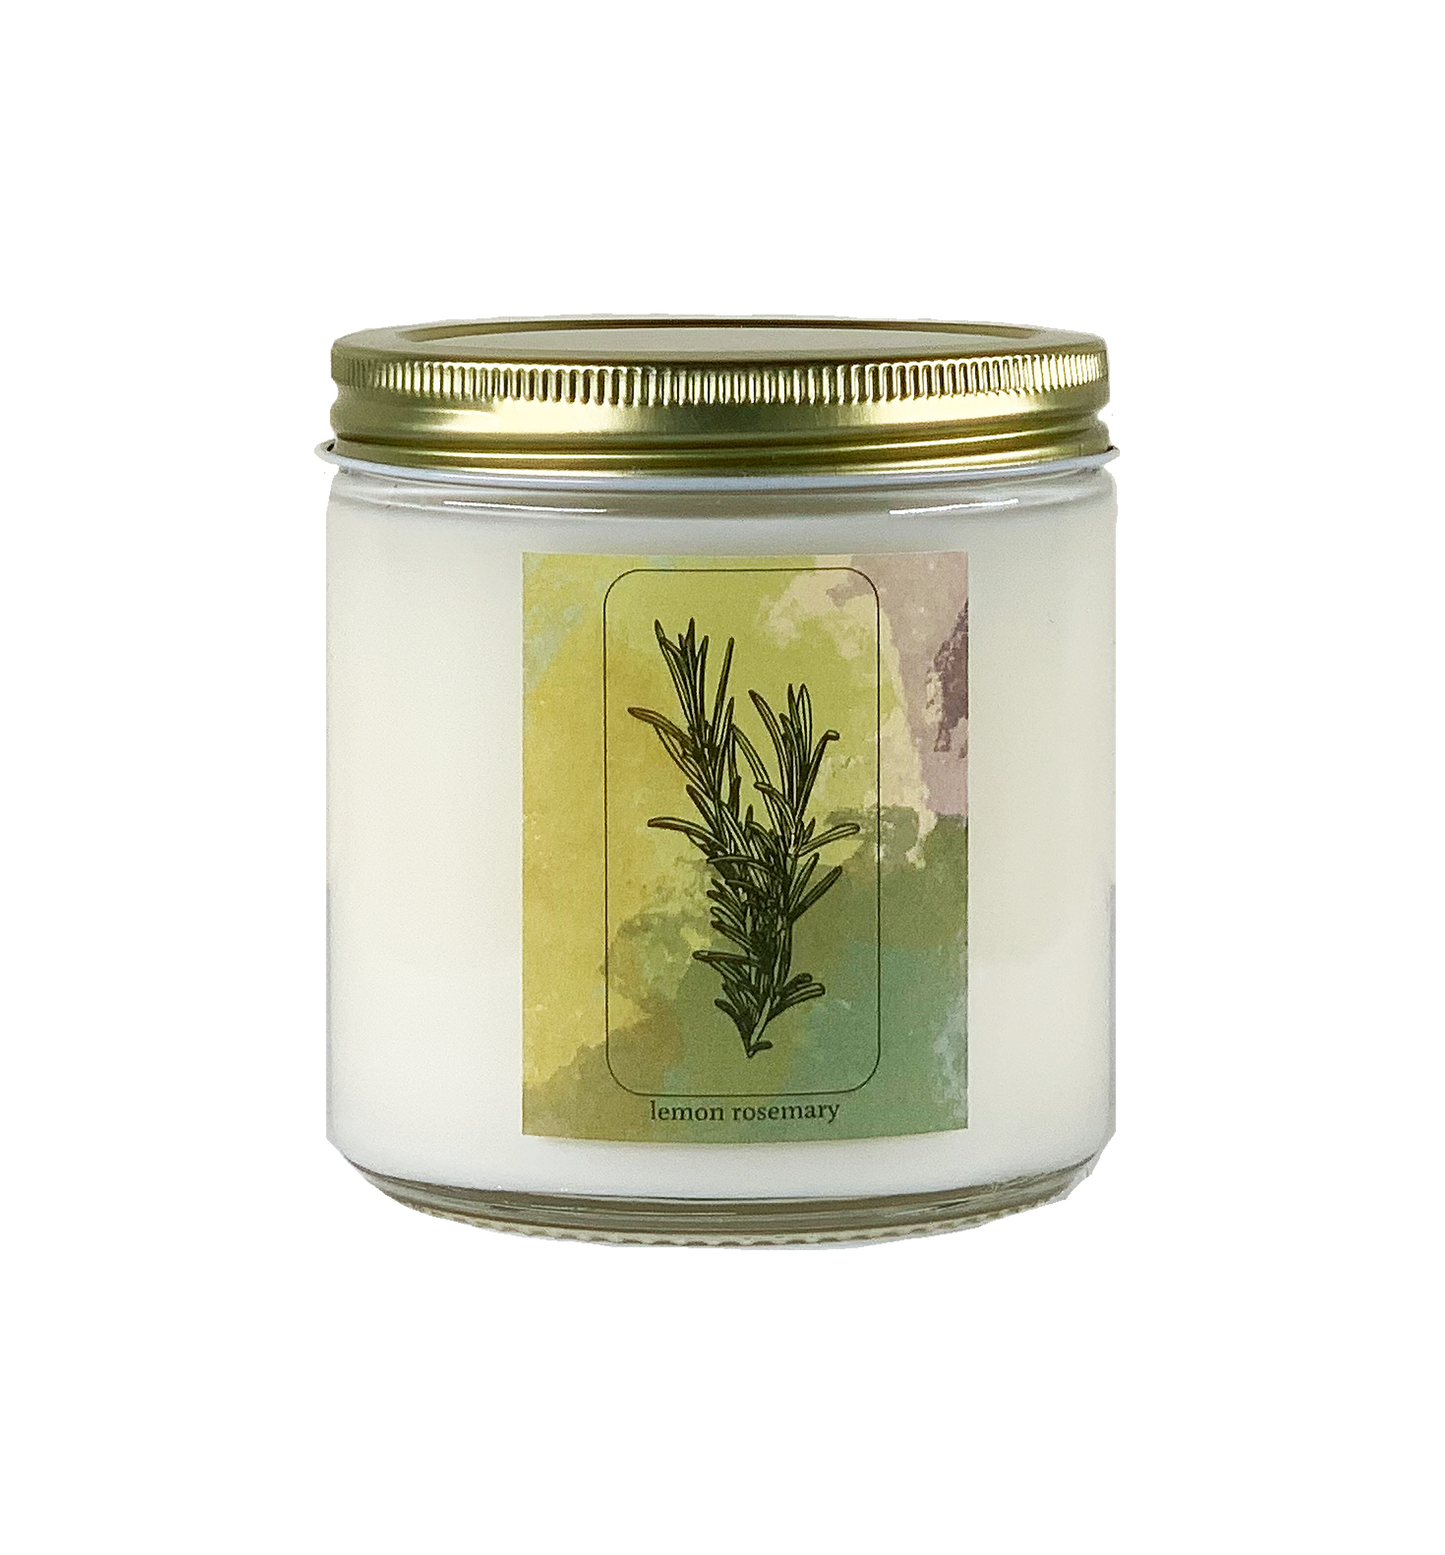 Lemon Rosemary Candle hand-poured in Austin TX